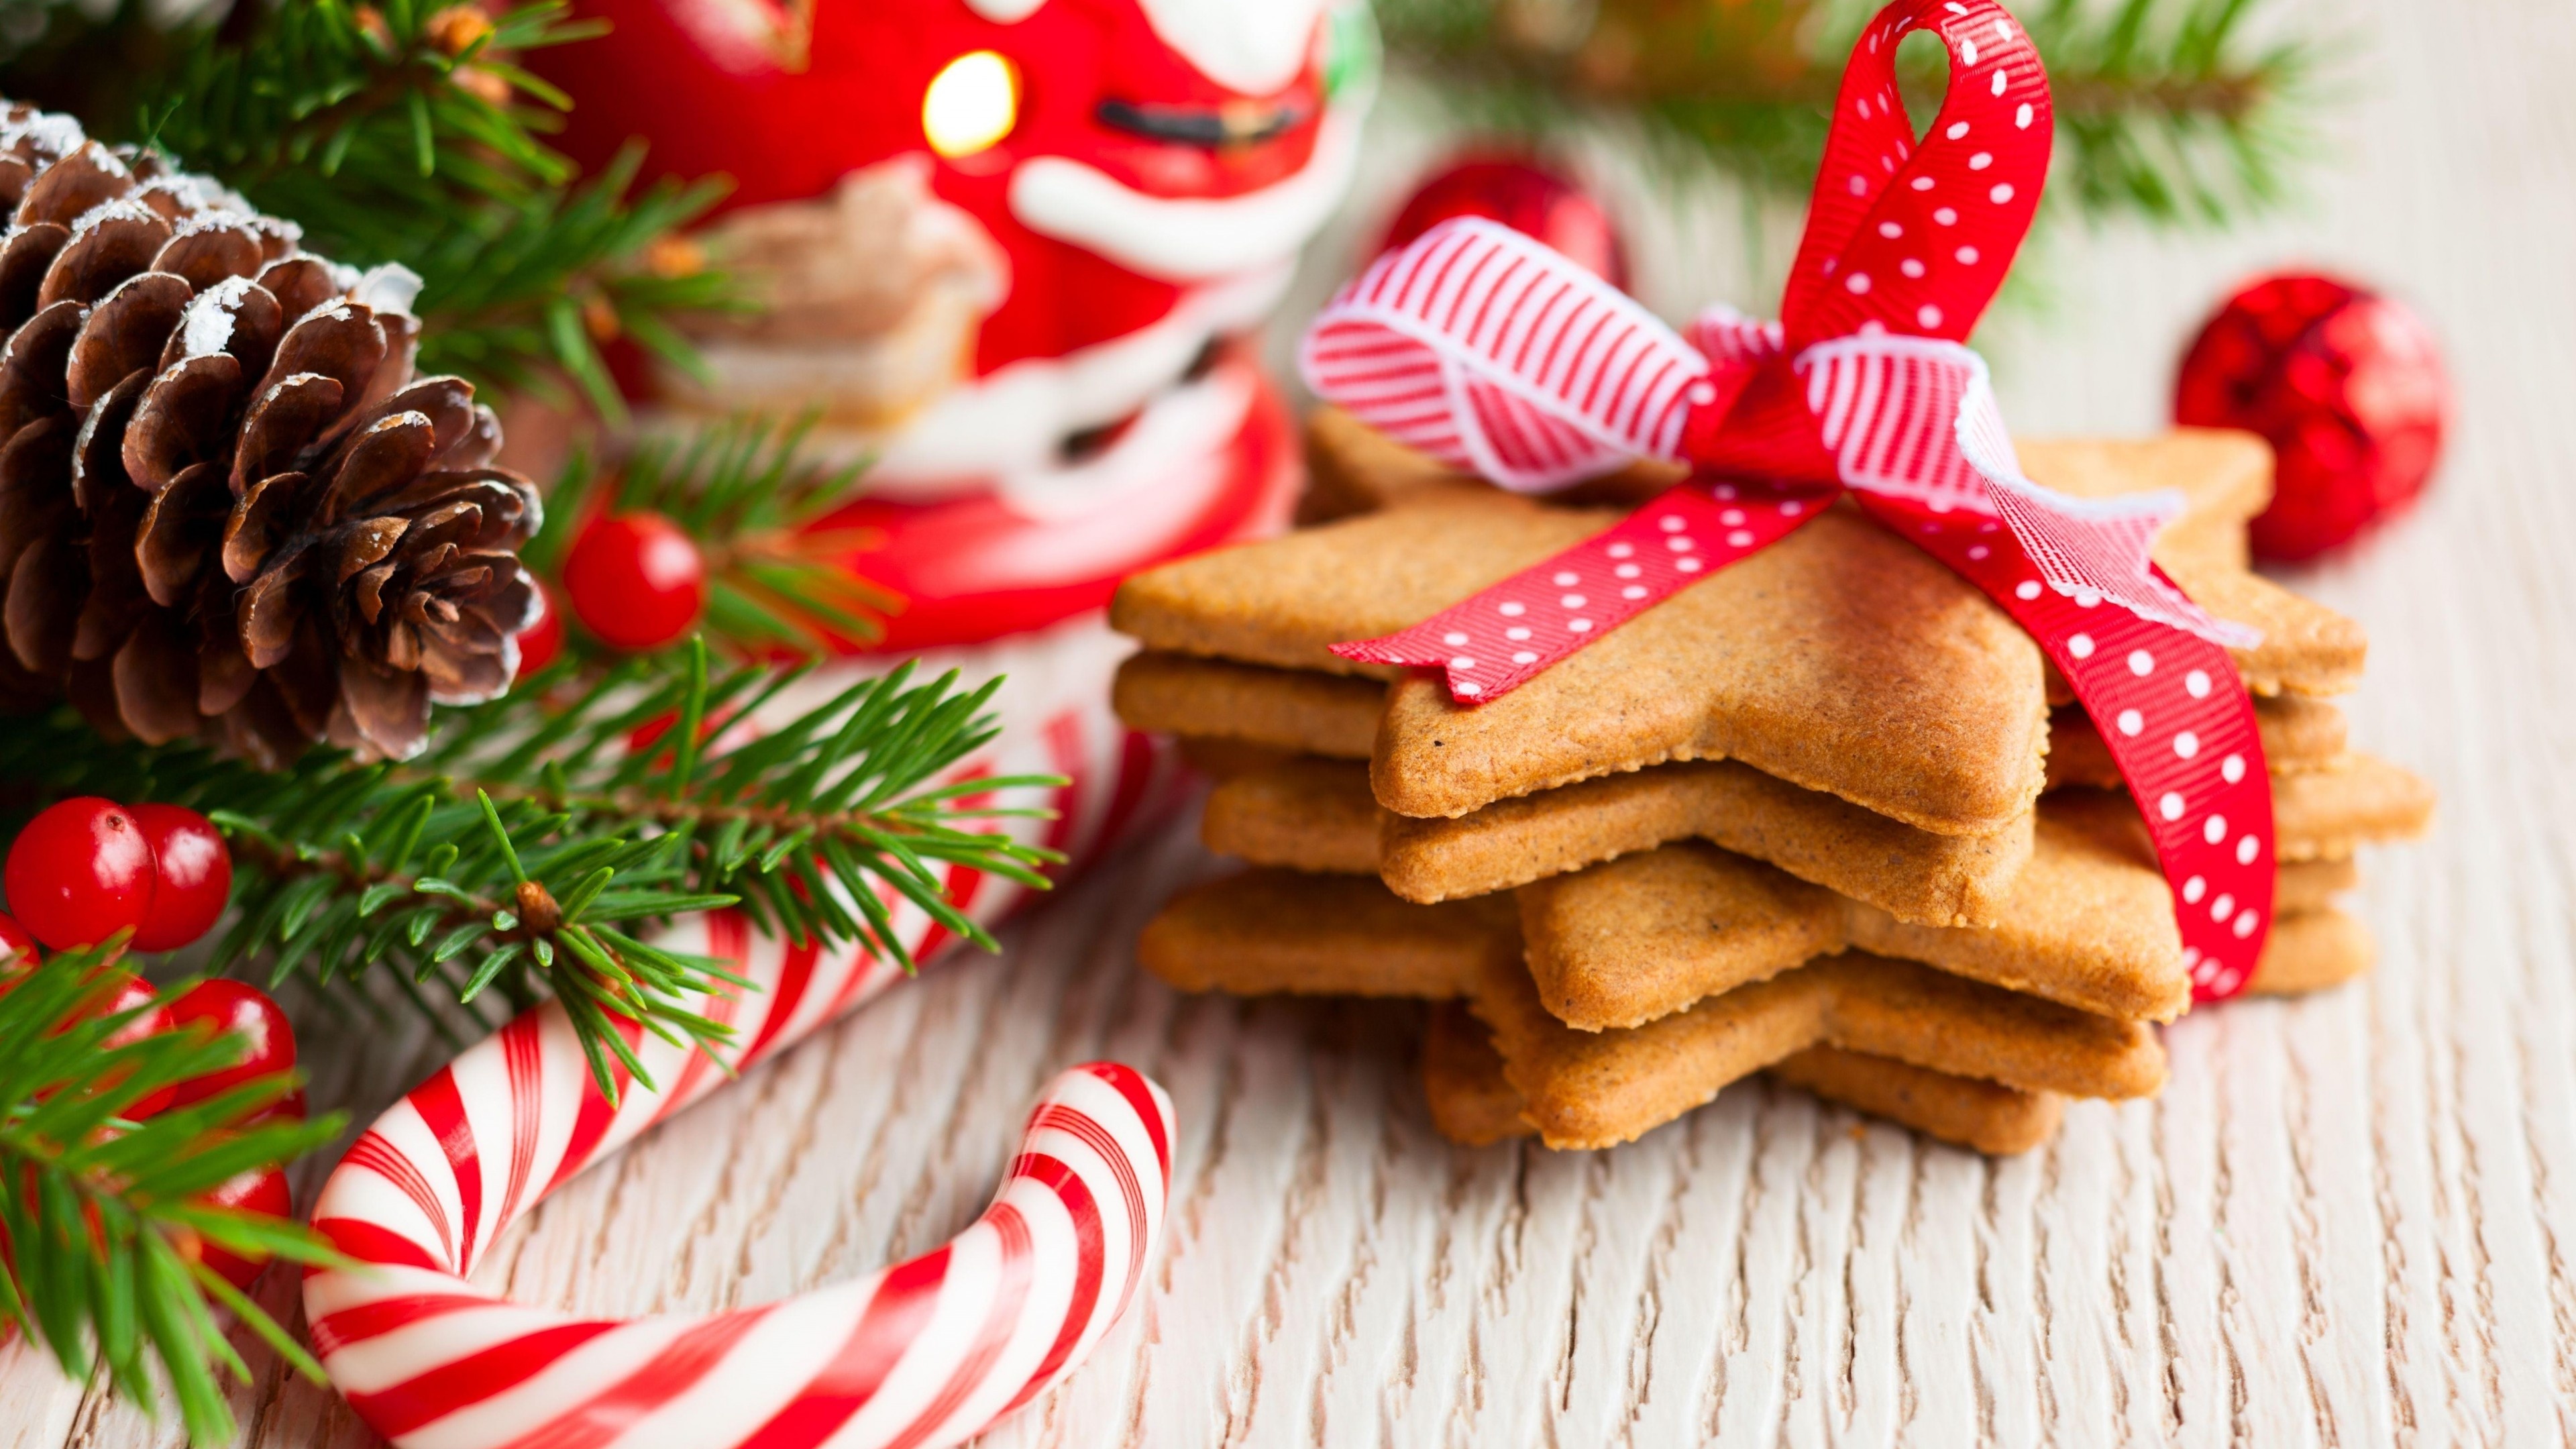 Christmas cookies, Sweet candy treats, Yummy holiday flavors, Festive delight, 3840x2160 4K Desktop